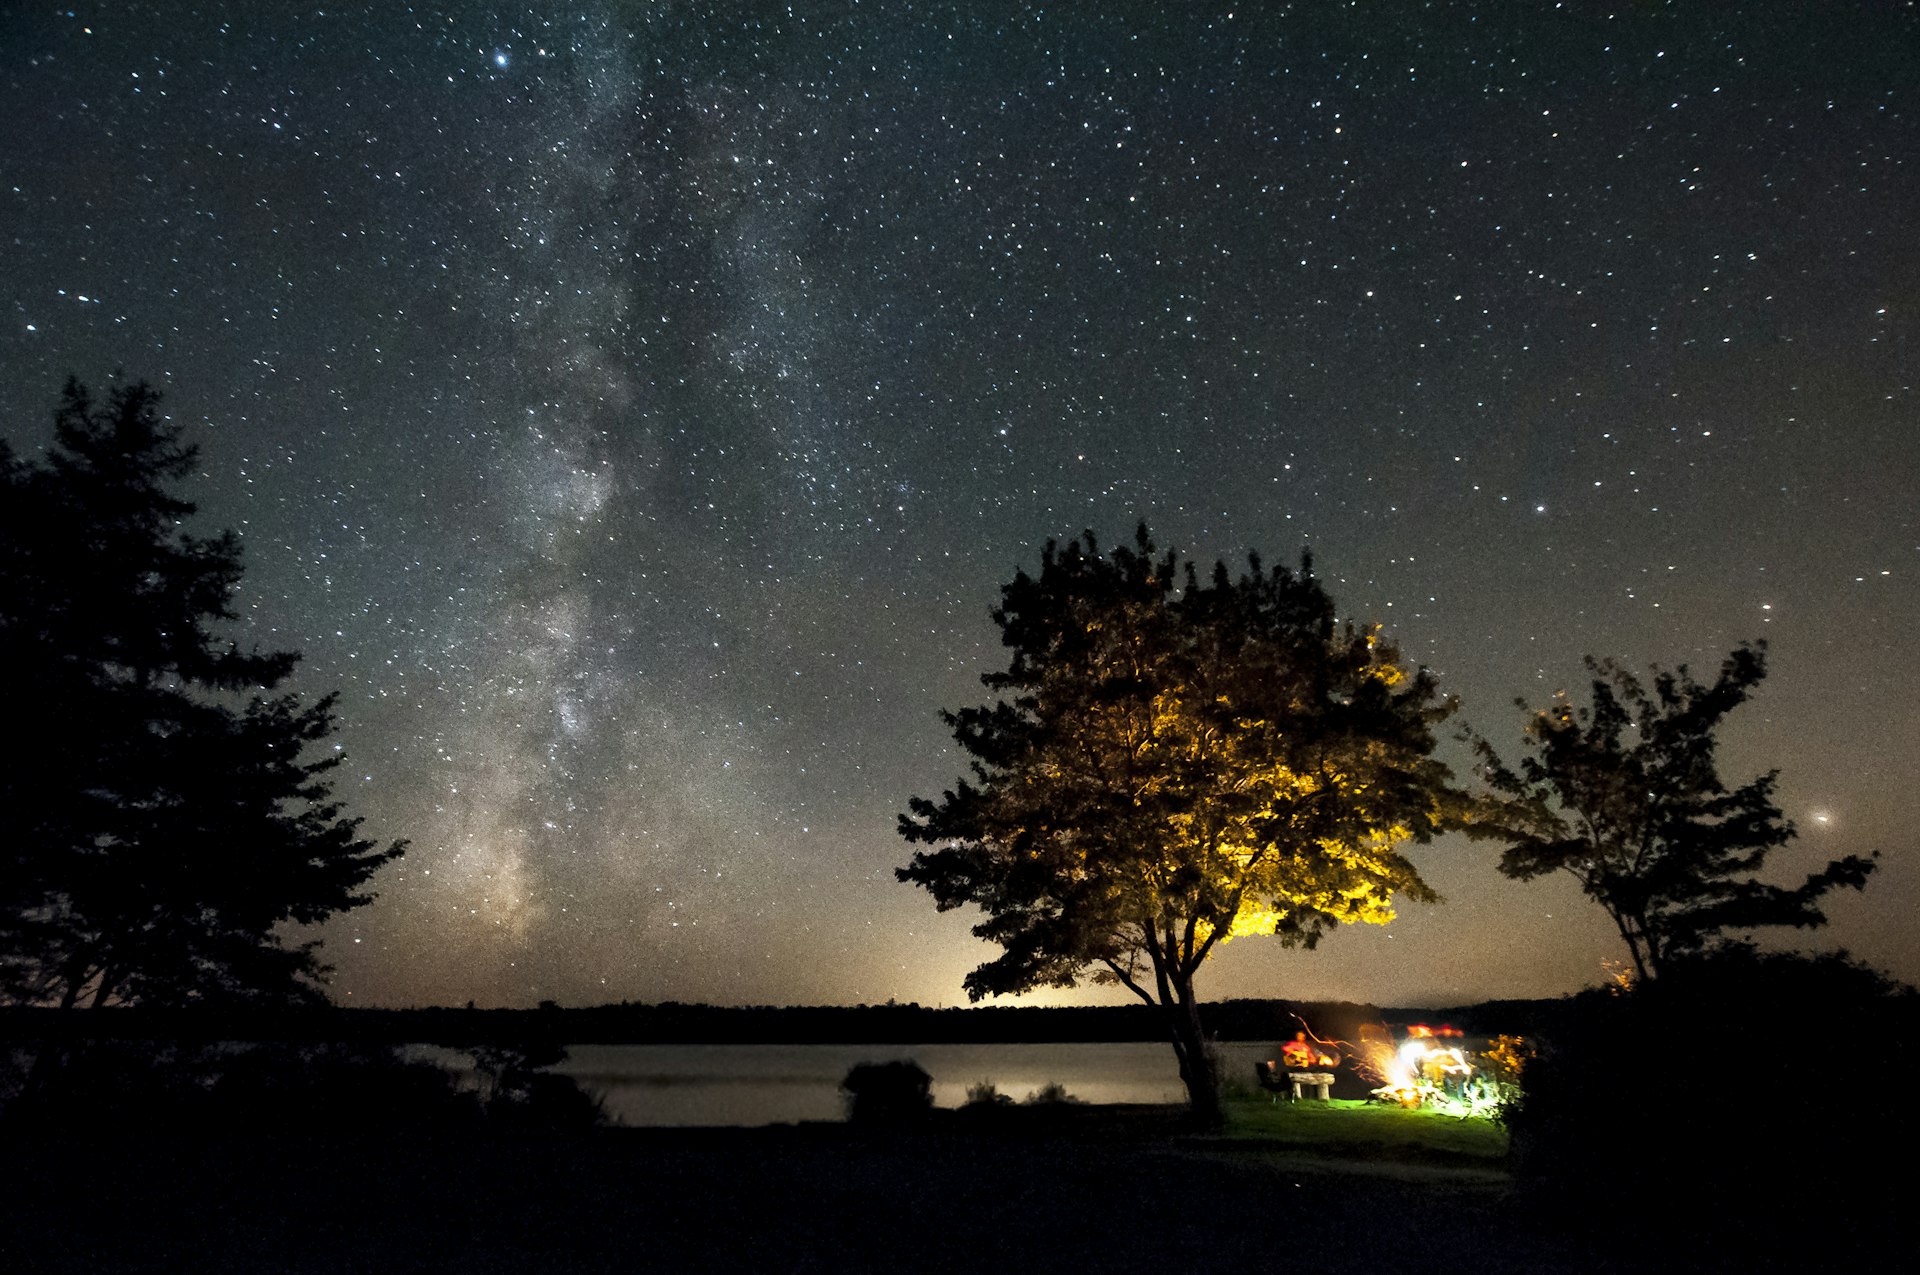 Nighttime shot of friends sitting at campfire underneath the Milky Way at Malay Falls, Nova Scotia, Canada Getty 